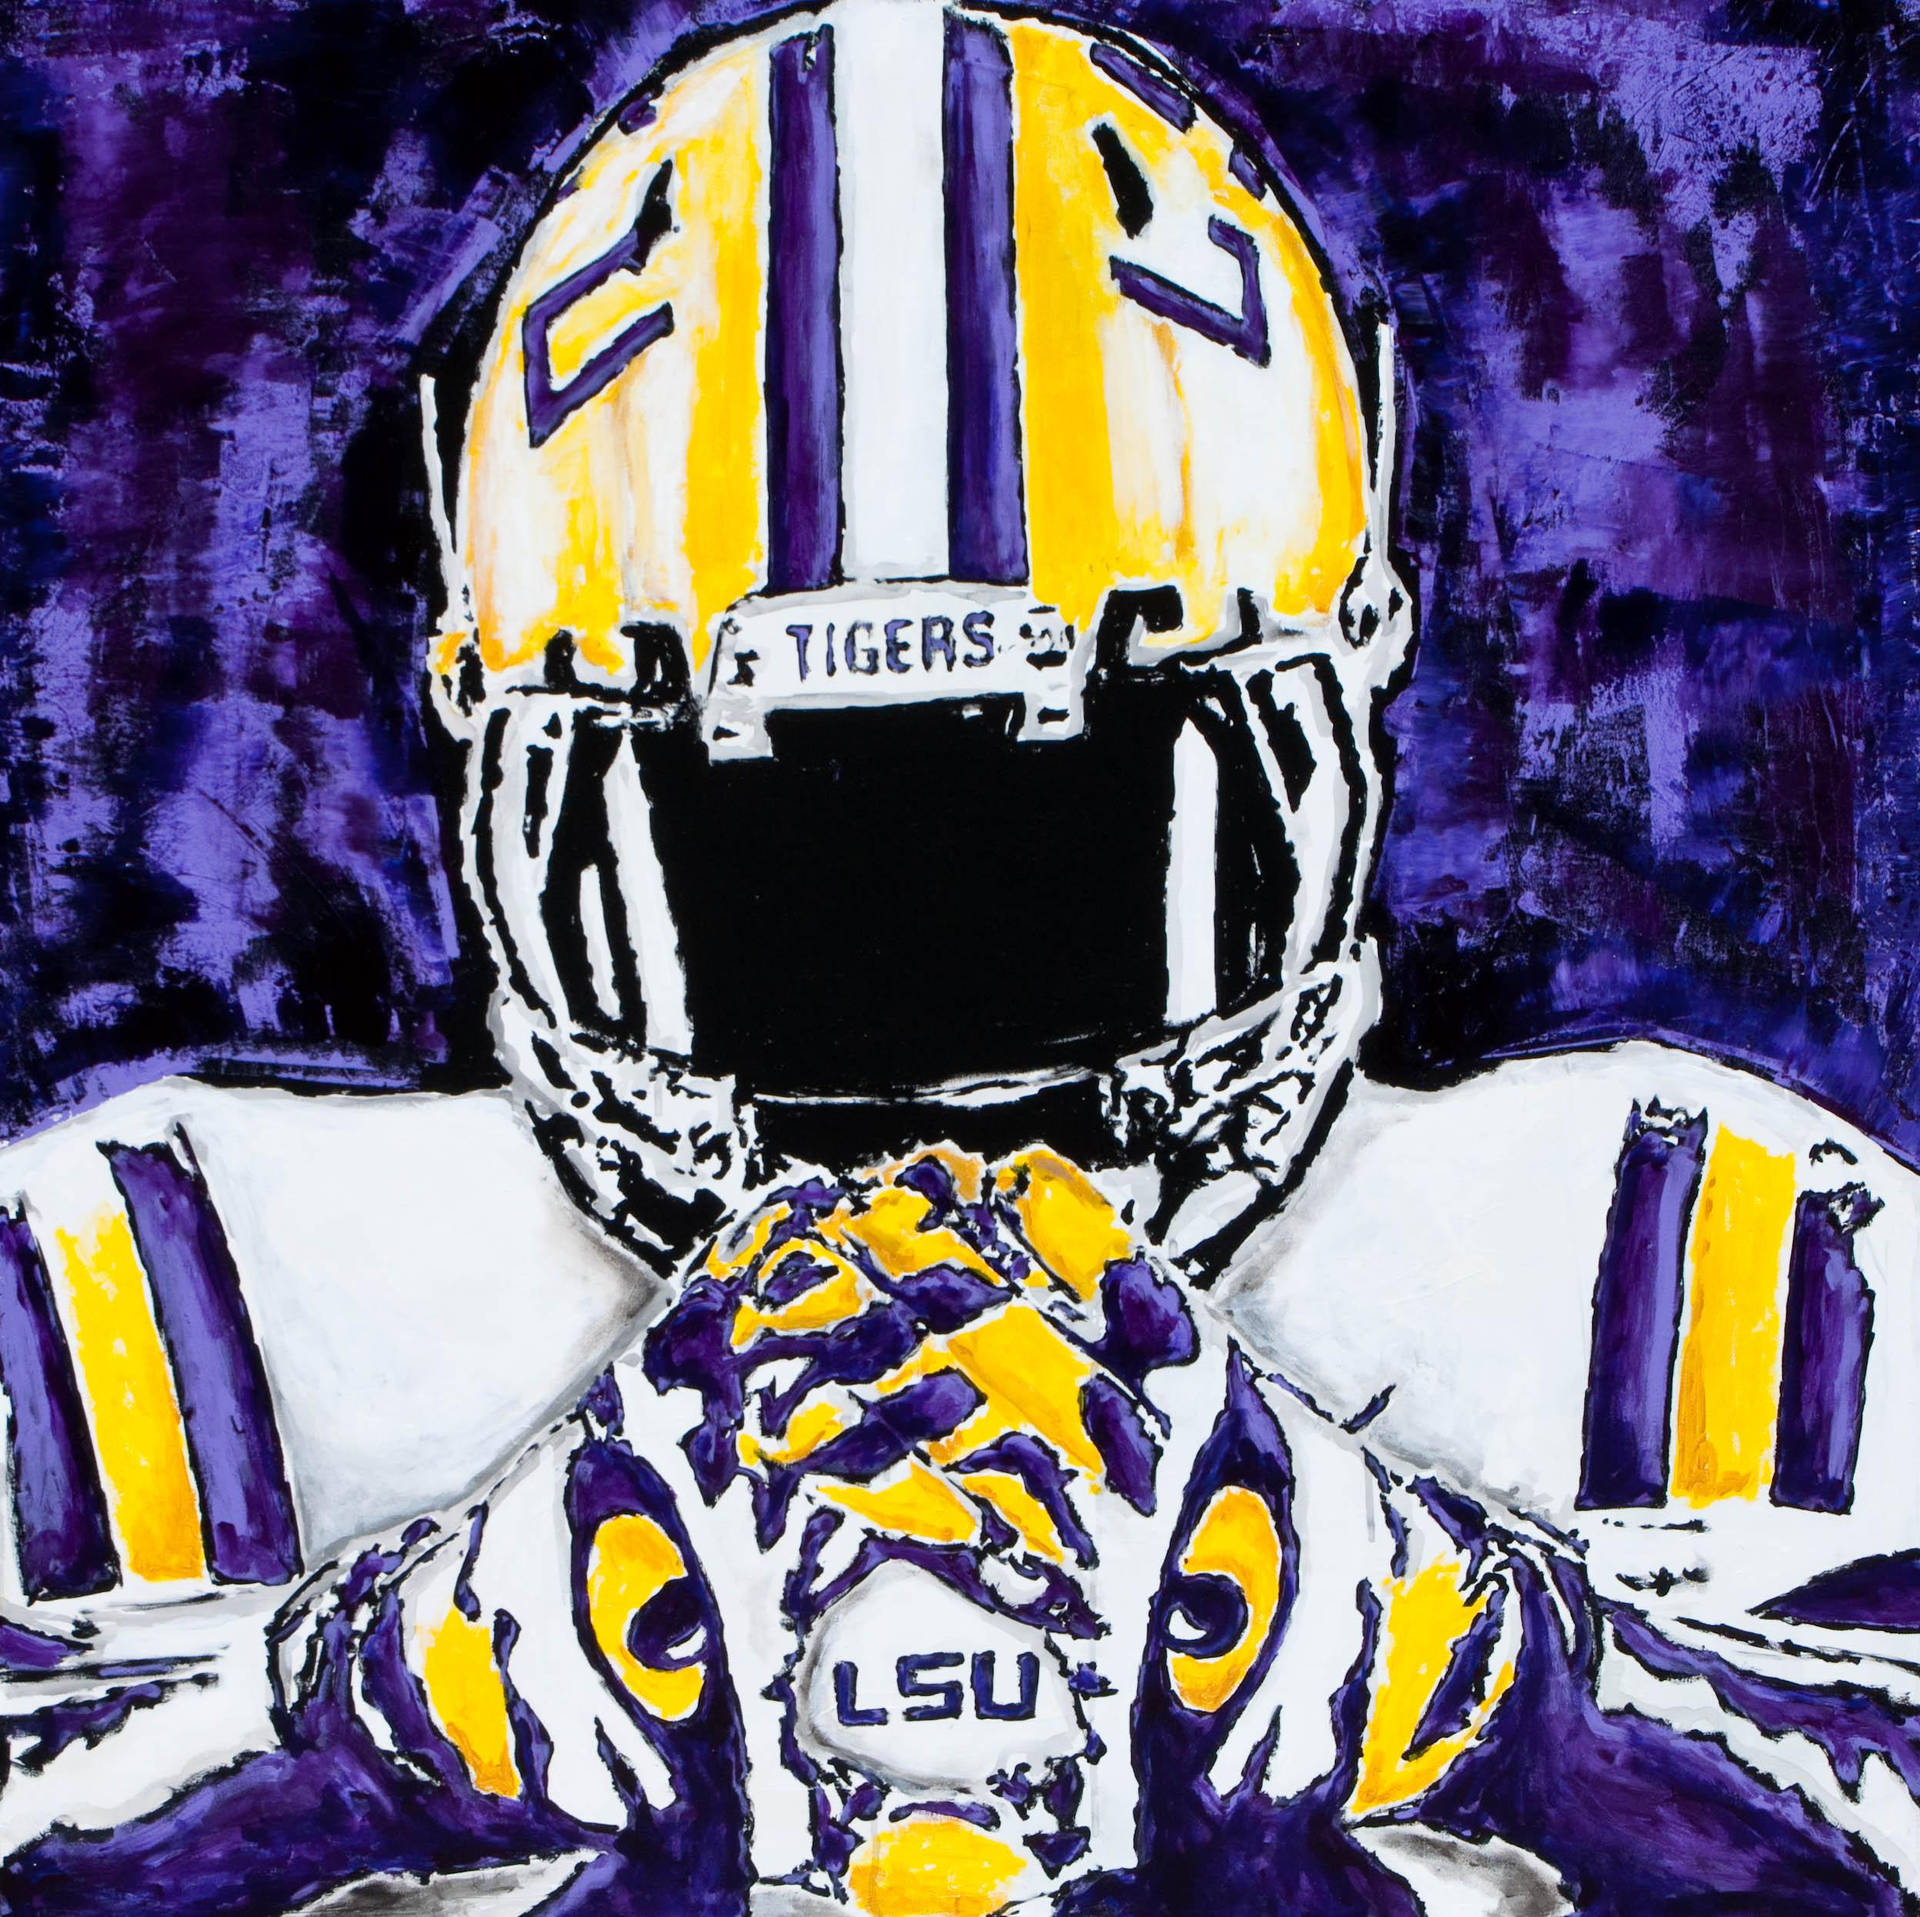 A Painting Of A Lsu Football Player